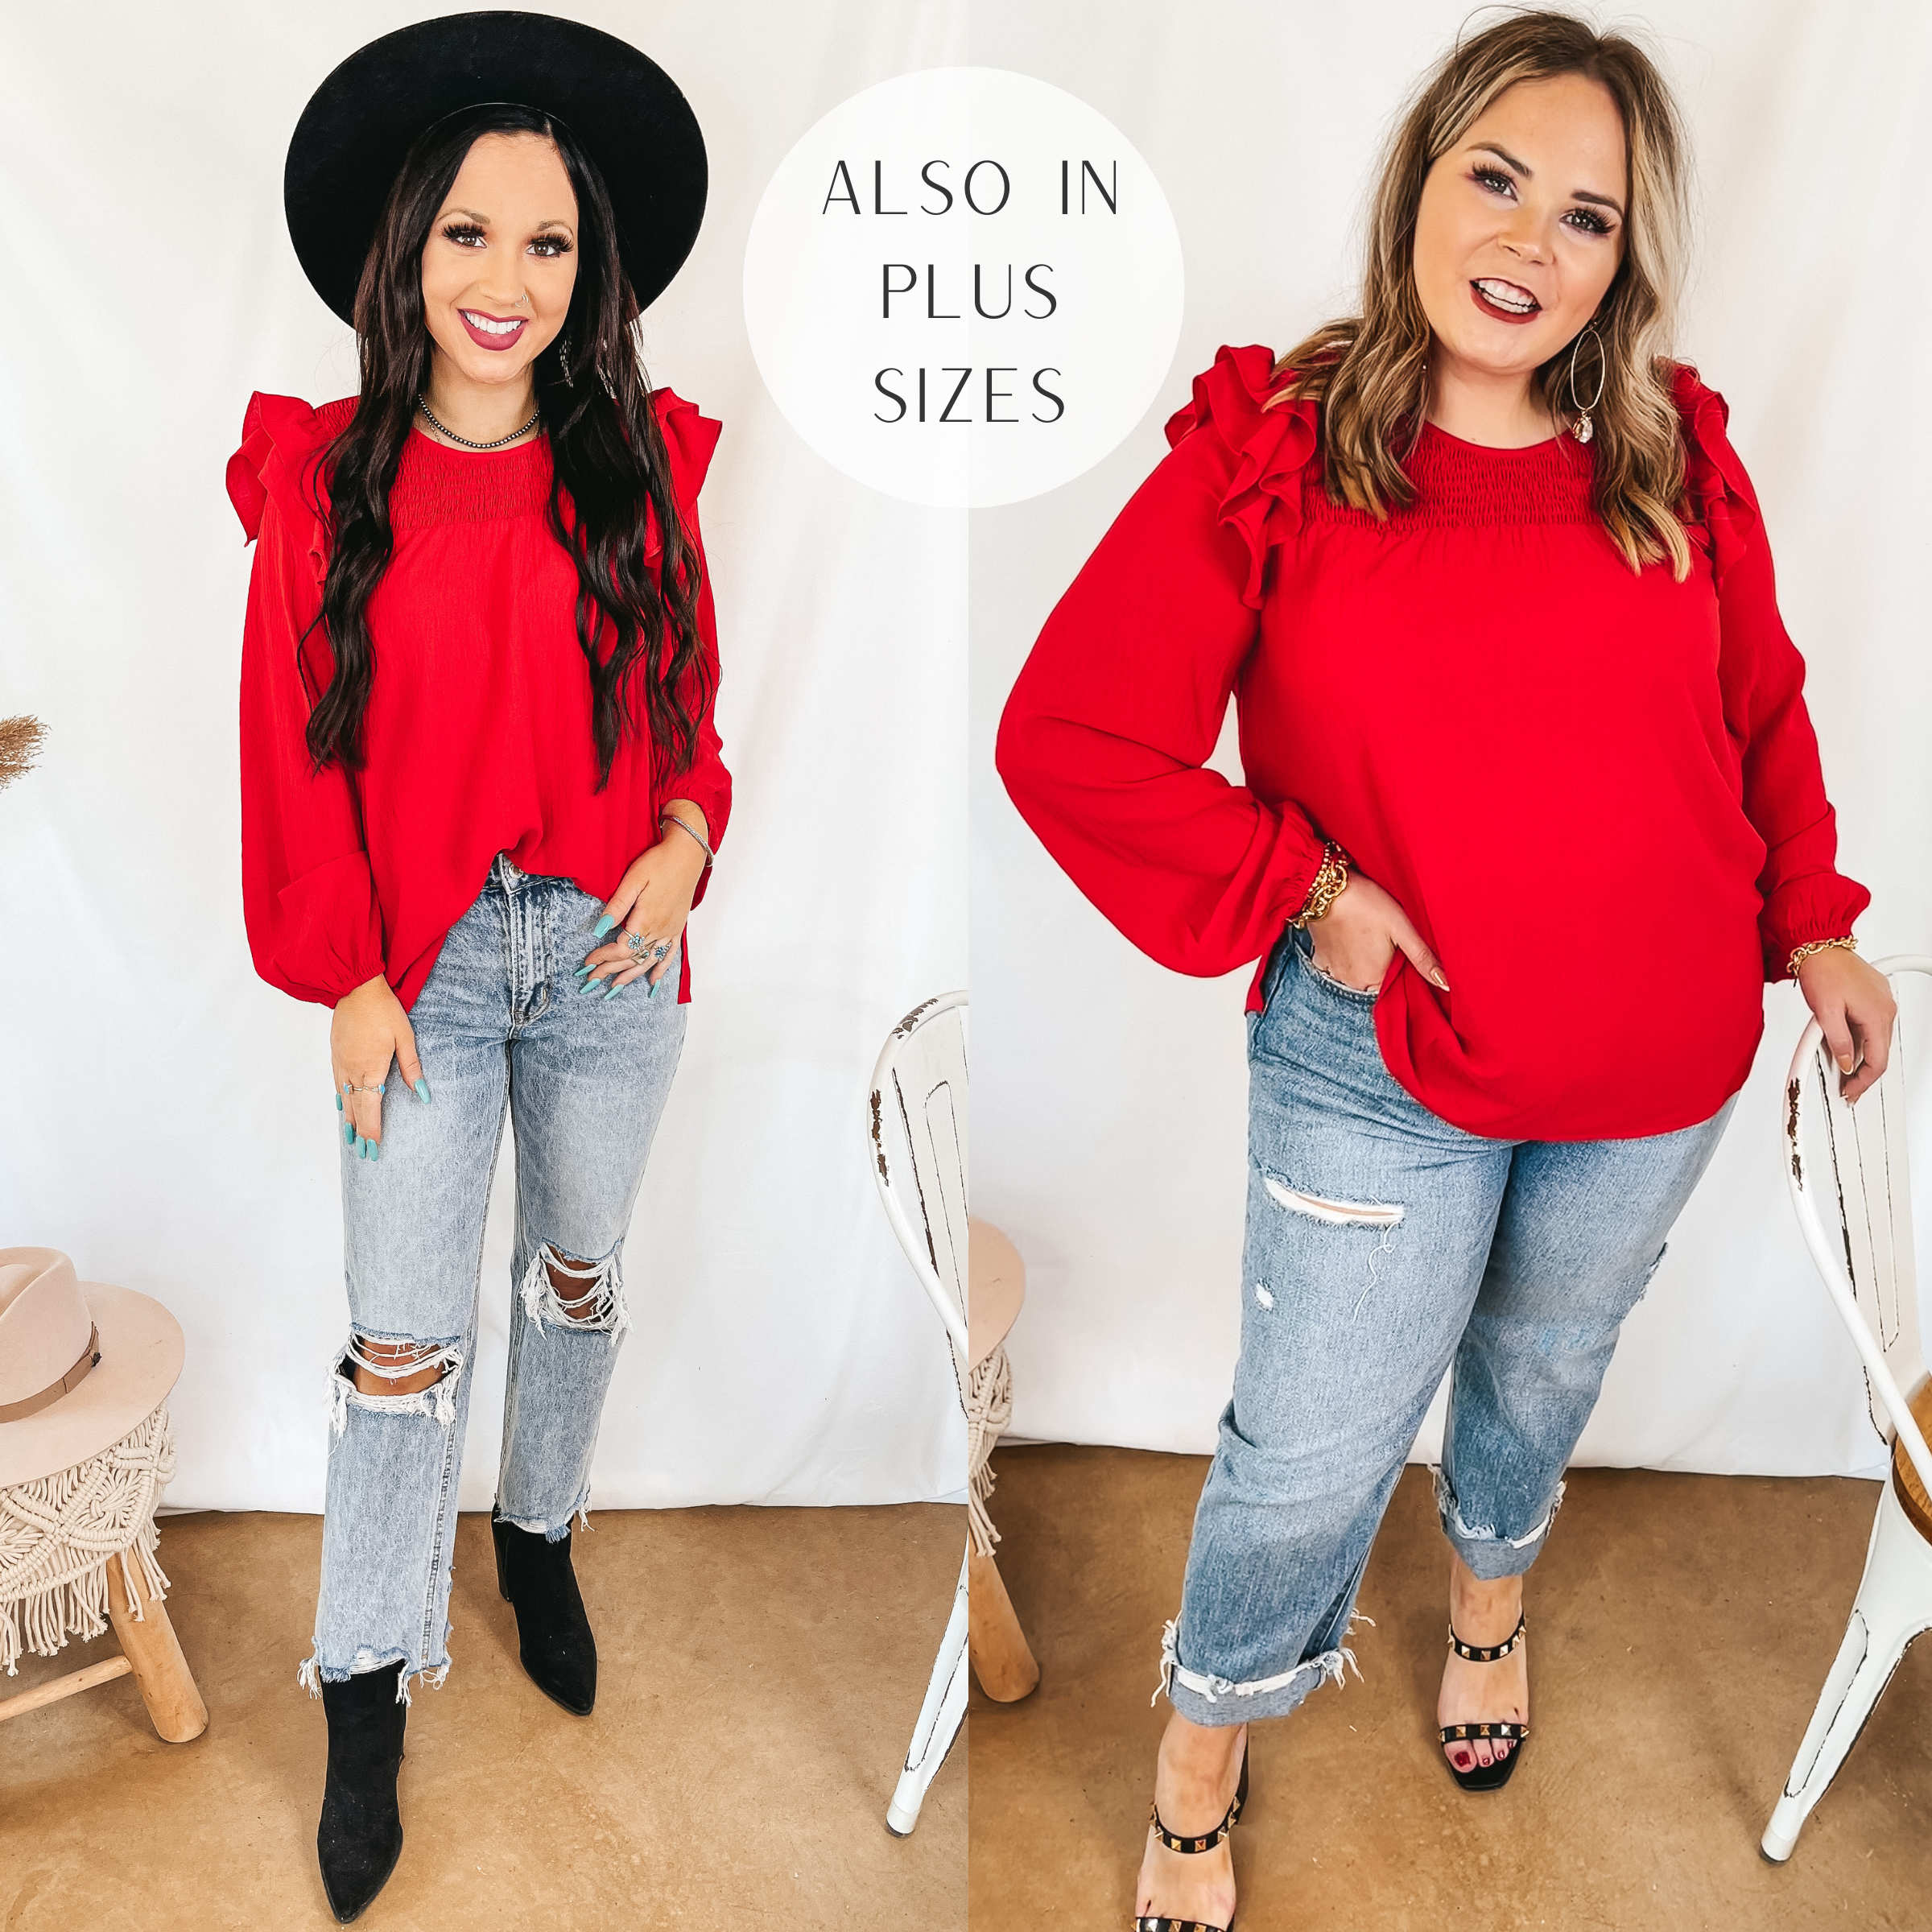 Models are wearing a red long sleeve blouse that has ruffle shoulders and a smocked upper. Size small model has it paired with light wash jeans, black booties, and a black hat. Size large model has it paired with black heels, light wash jeans, and gold jewelry.